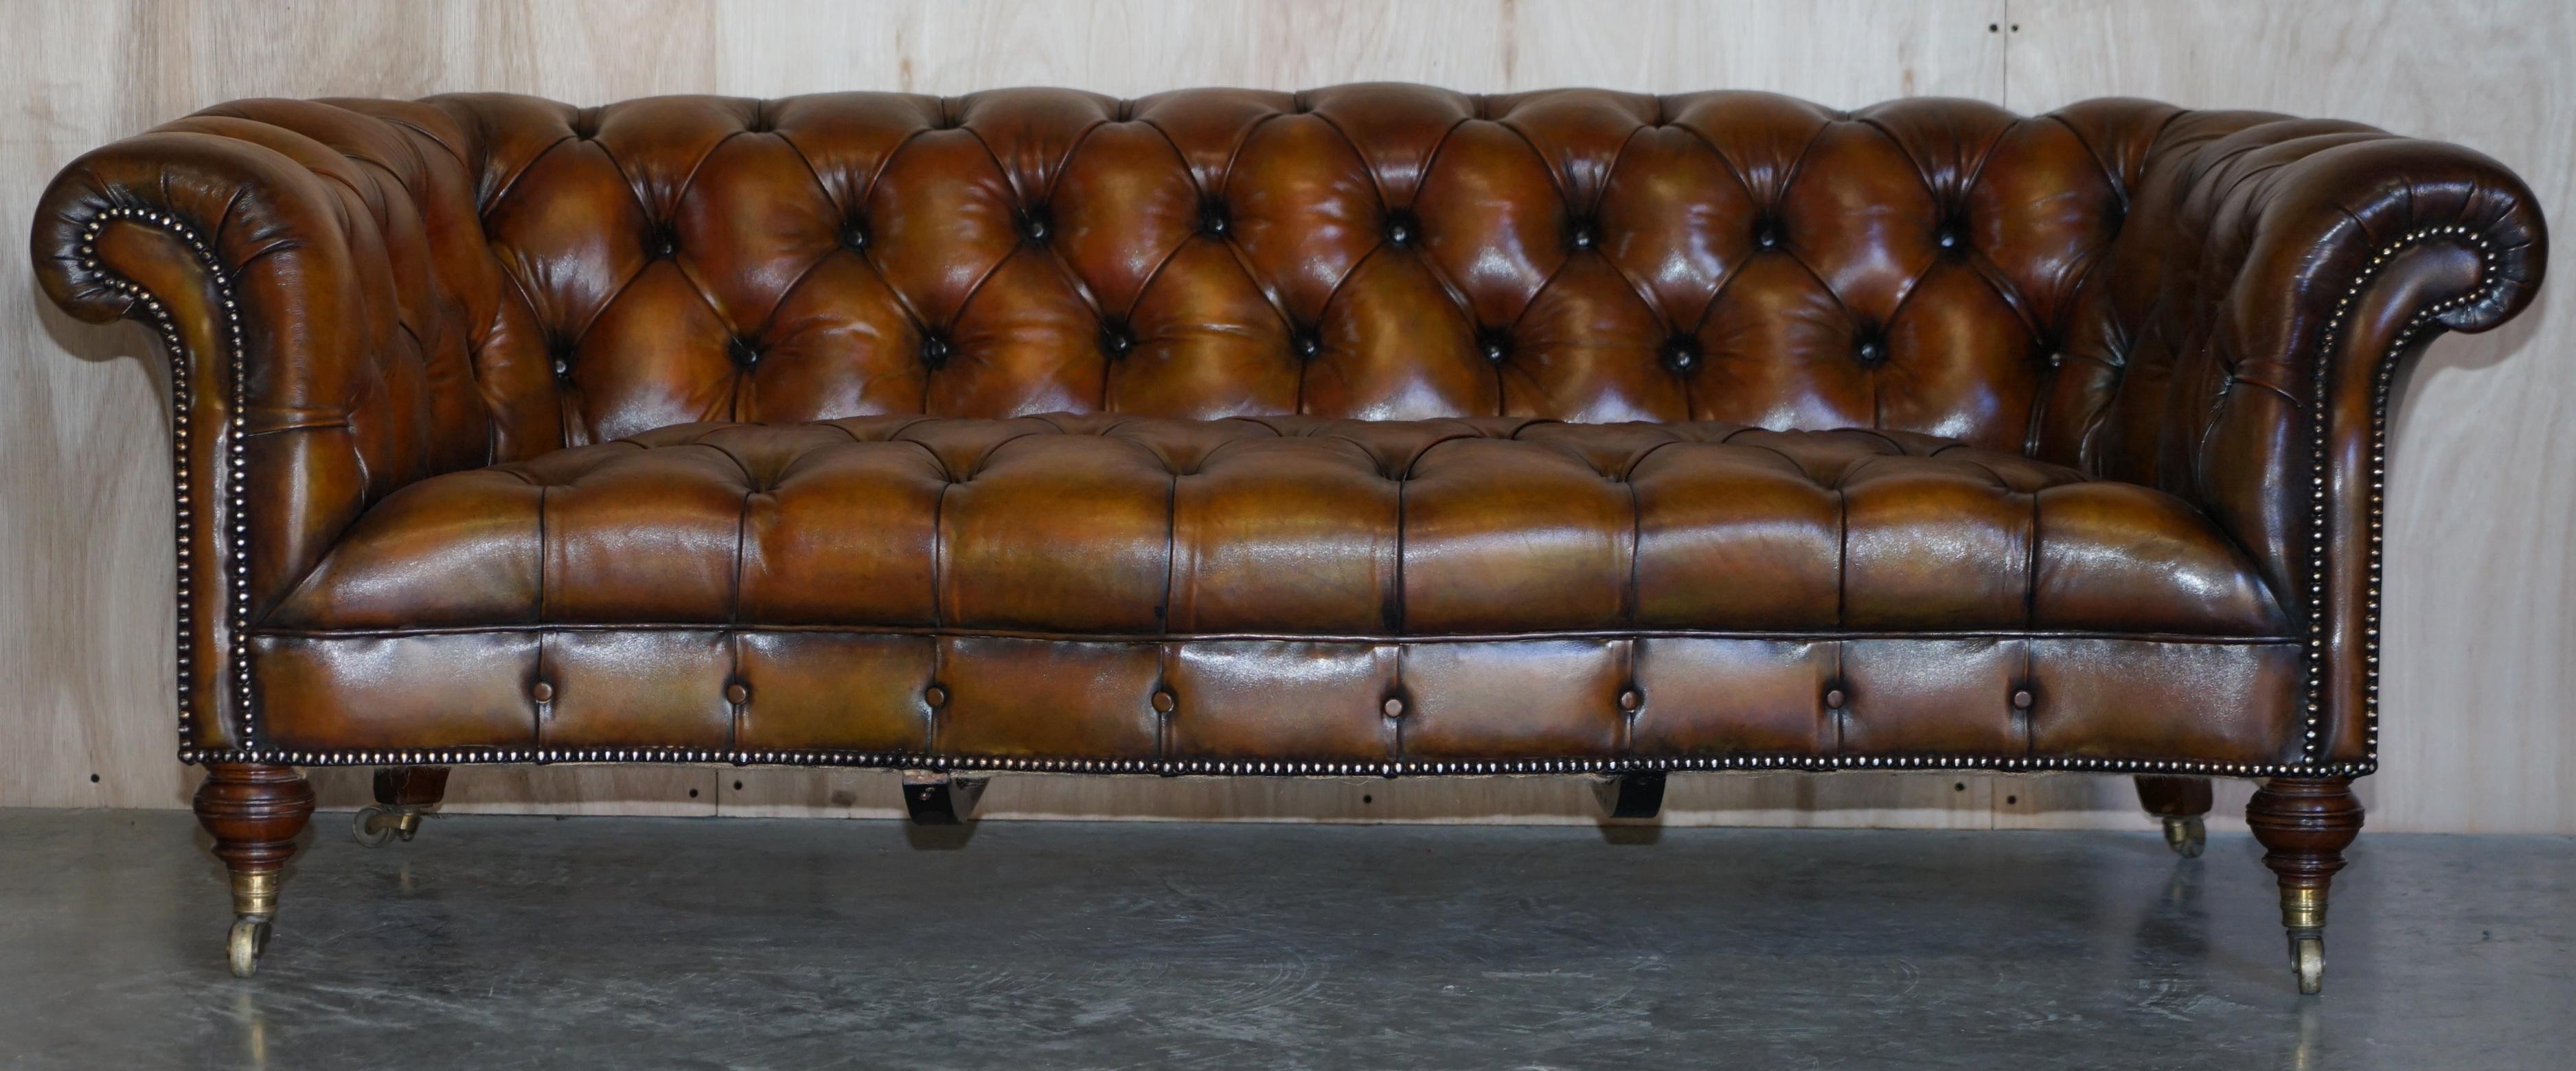 Early Victorian Fine Important Restored Pair of Antique Howard & Sons Leather Chesterfield Sofas For Sale